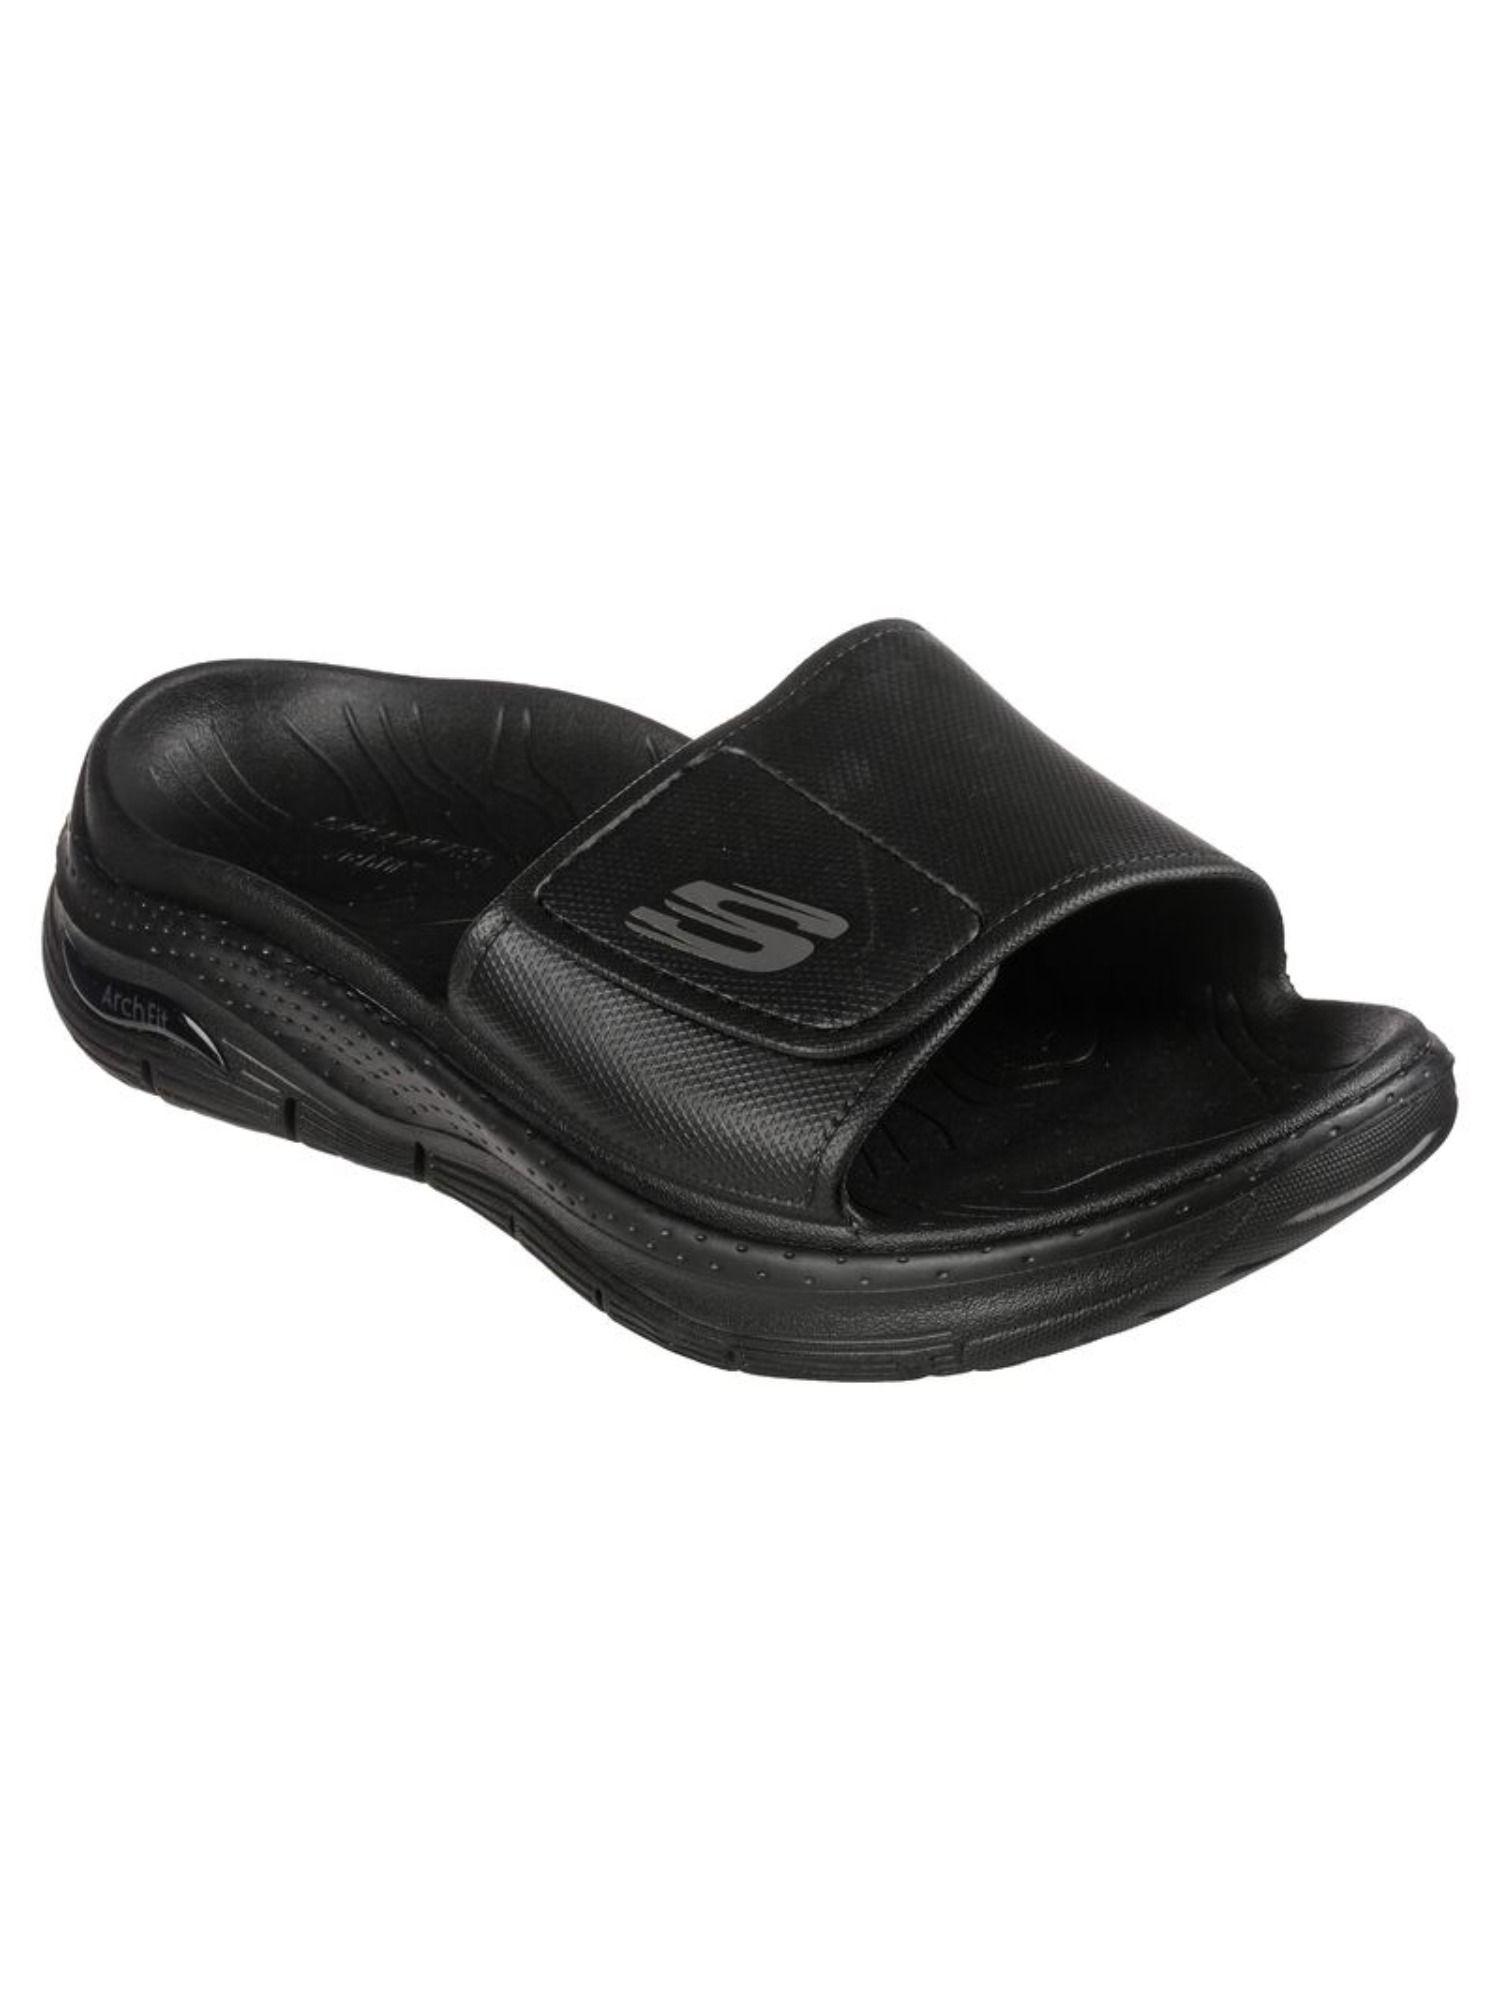 arch-fit-black-arch-fit-sliders